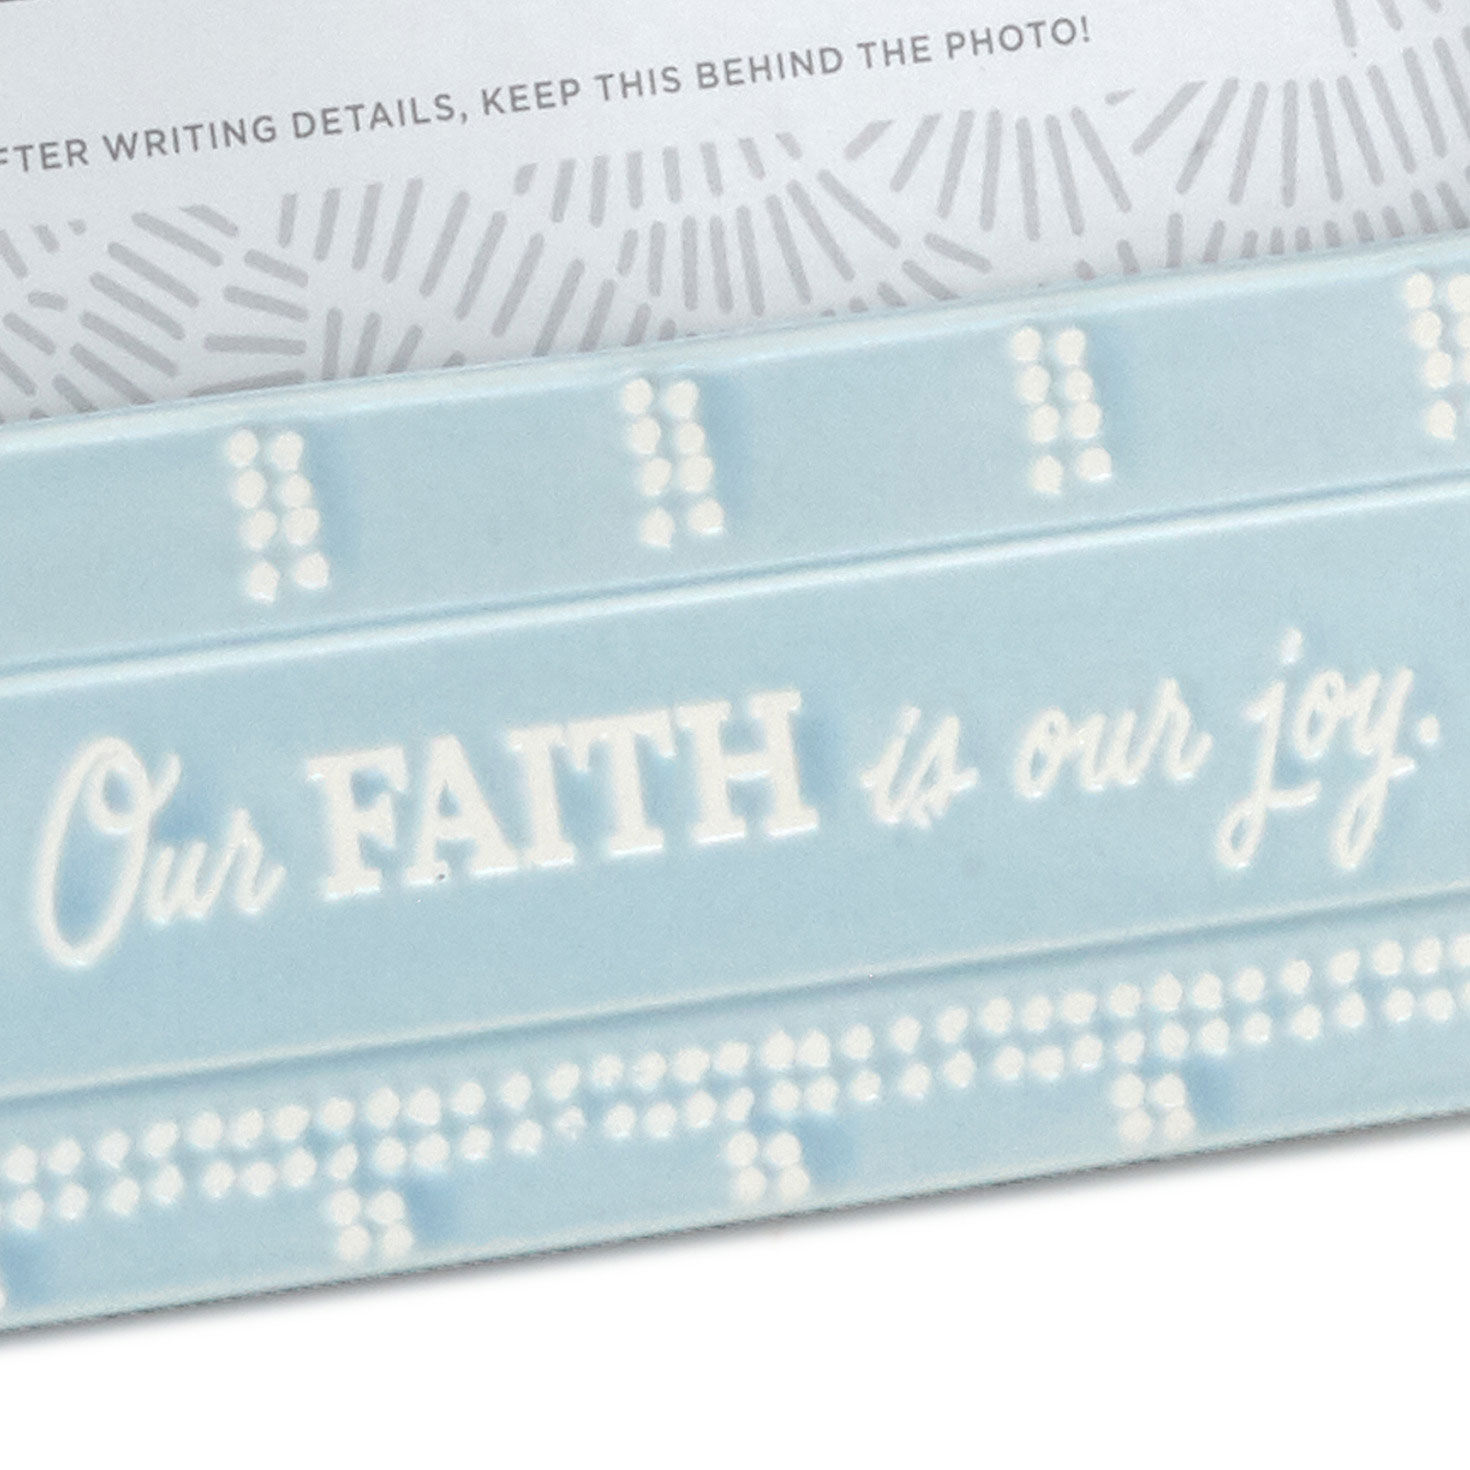 Our Faith Is Our Joy Picture Frame, 4x6 for only USD 22.99 | Hallmark